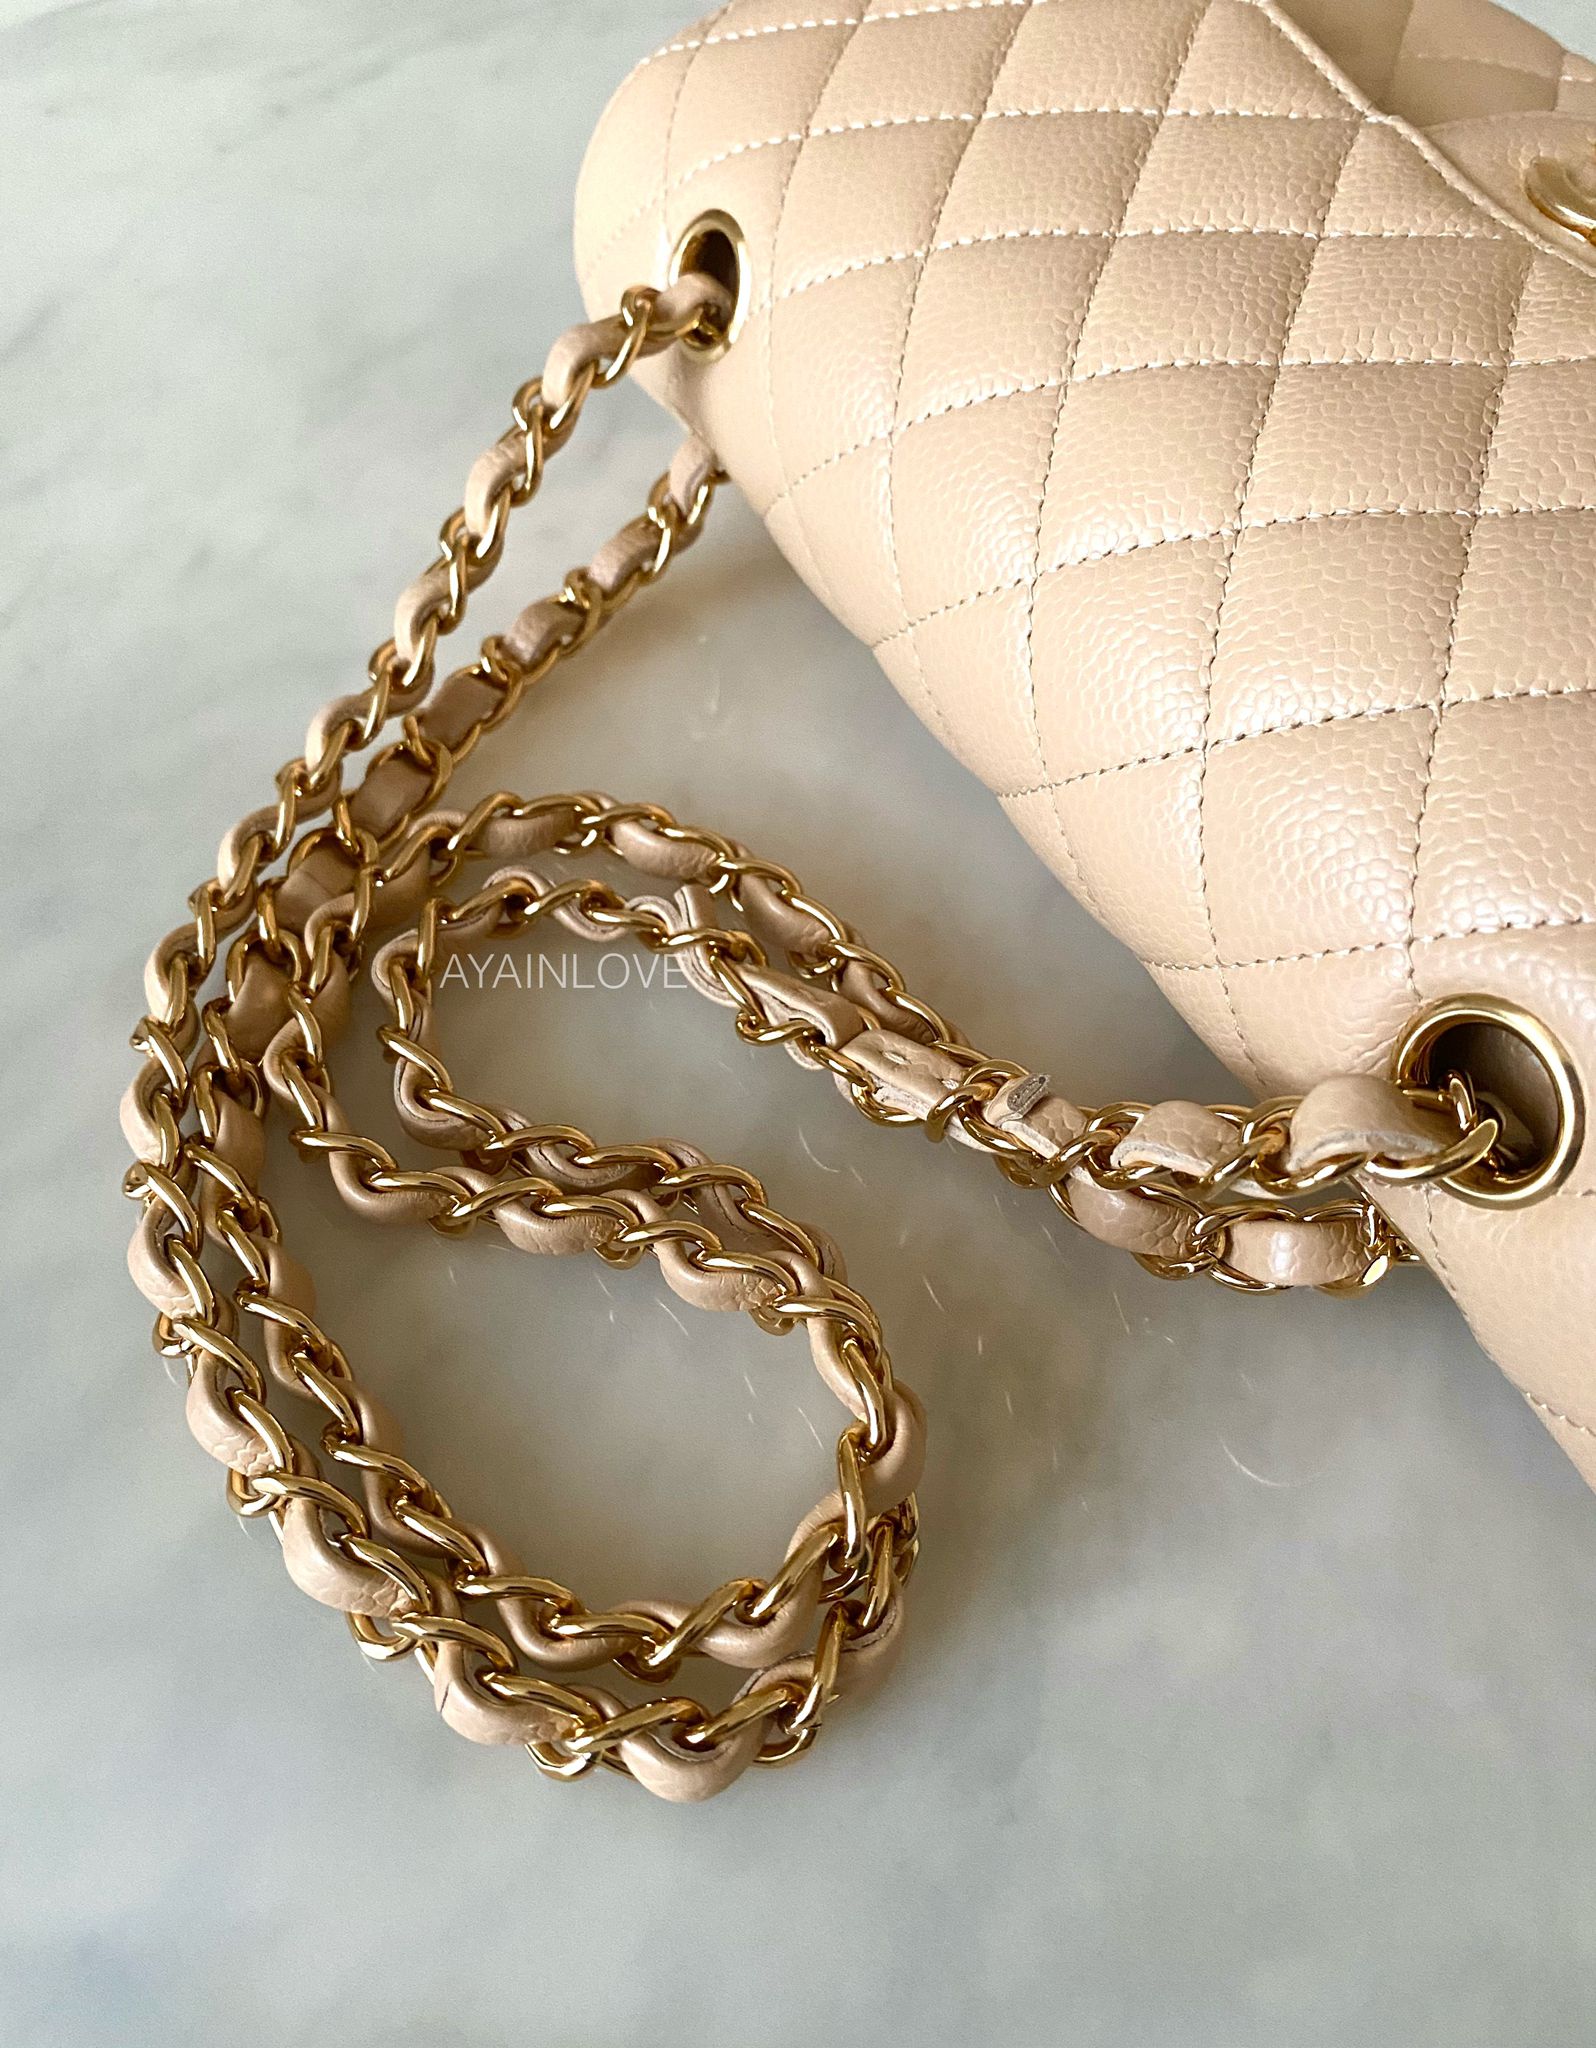 CHANEL Beige Clair Caviar Small Classic Flap Bag Gold Hardware